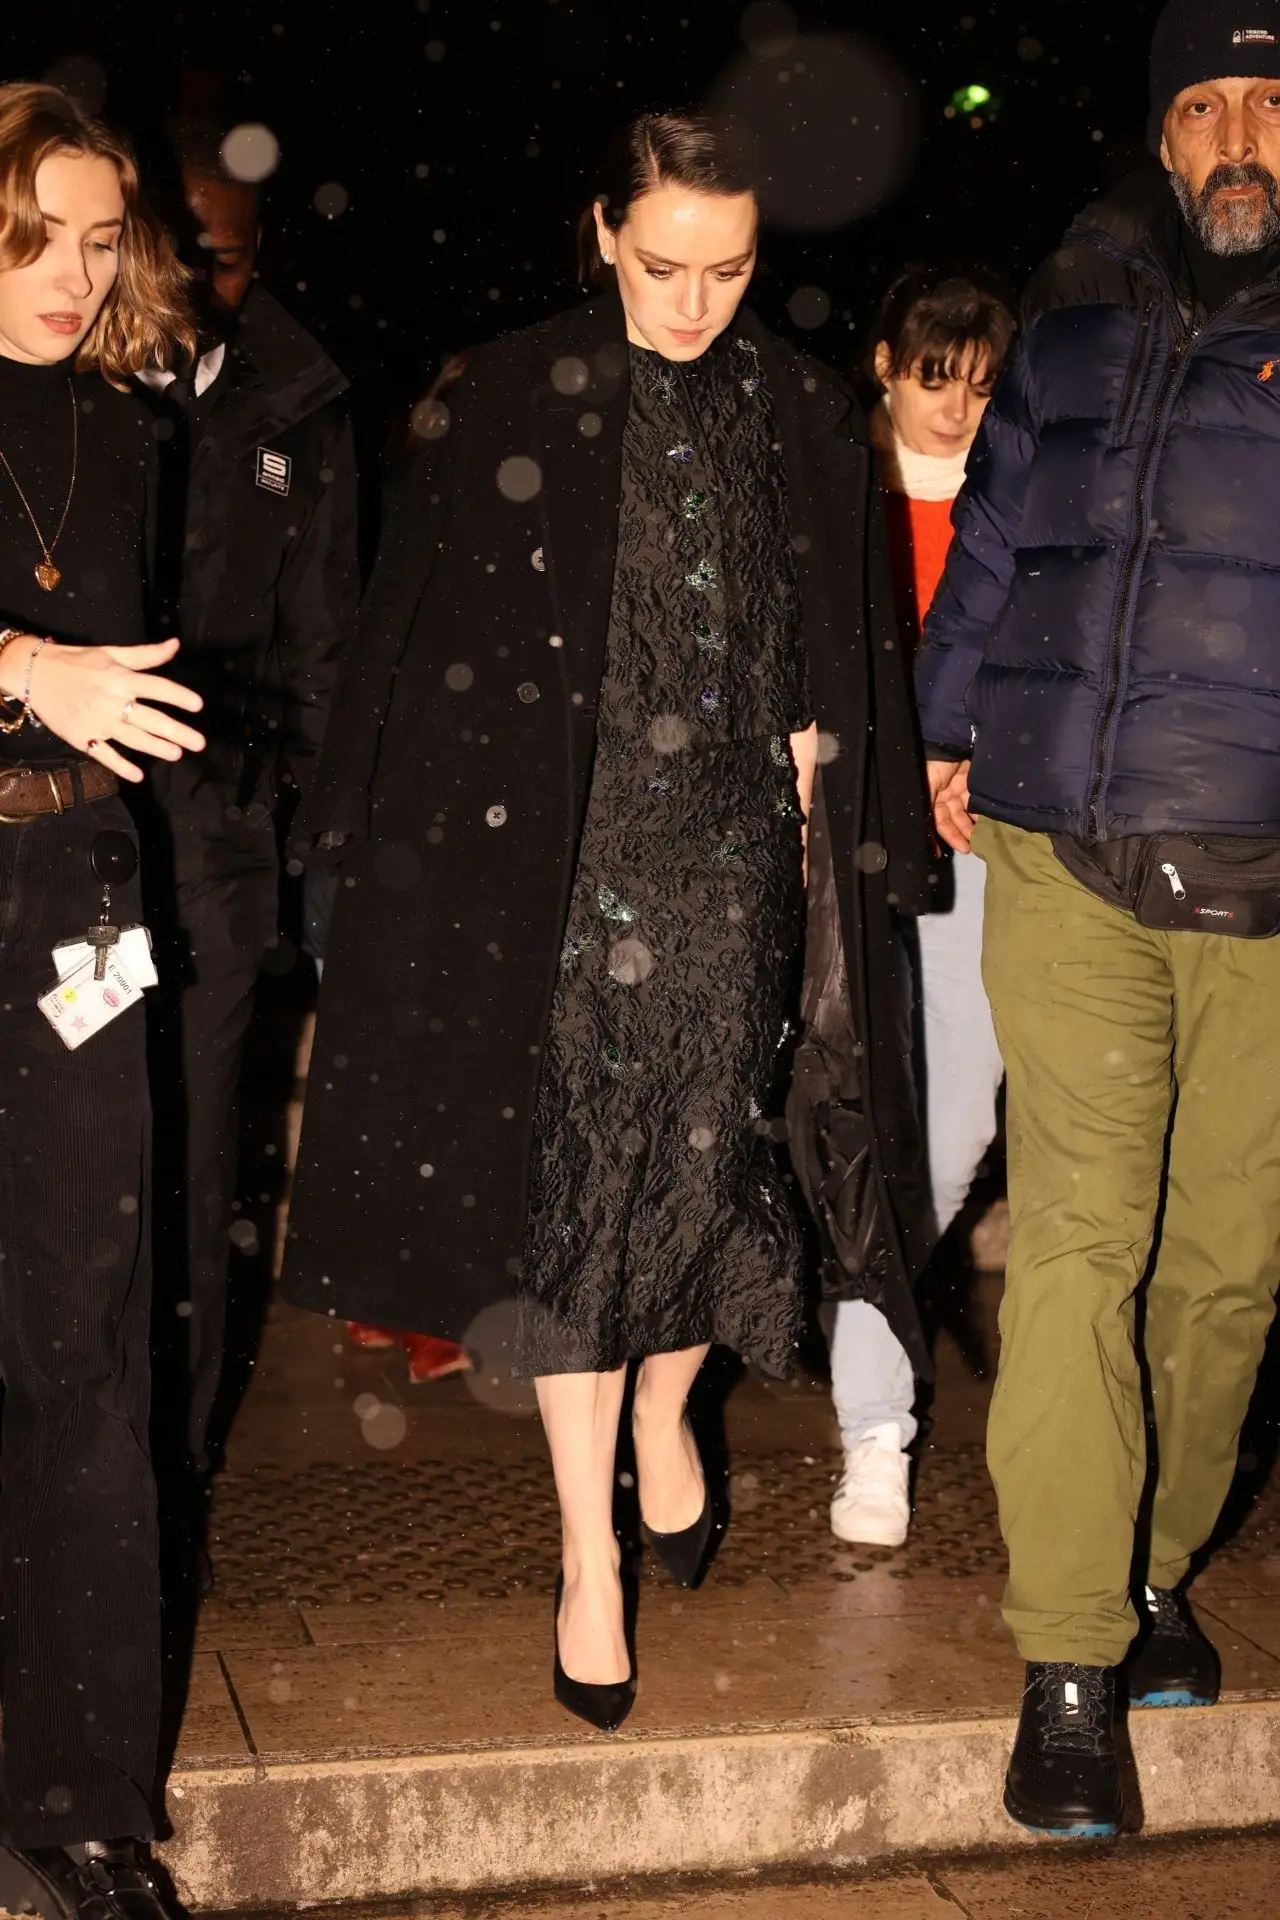 DAISY RIDLEY ARRIVES AT SOMETIMES I THINK ABOUT DYING PREMIERE IN PARIS